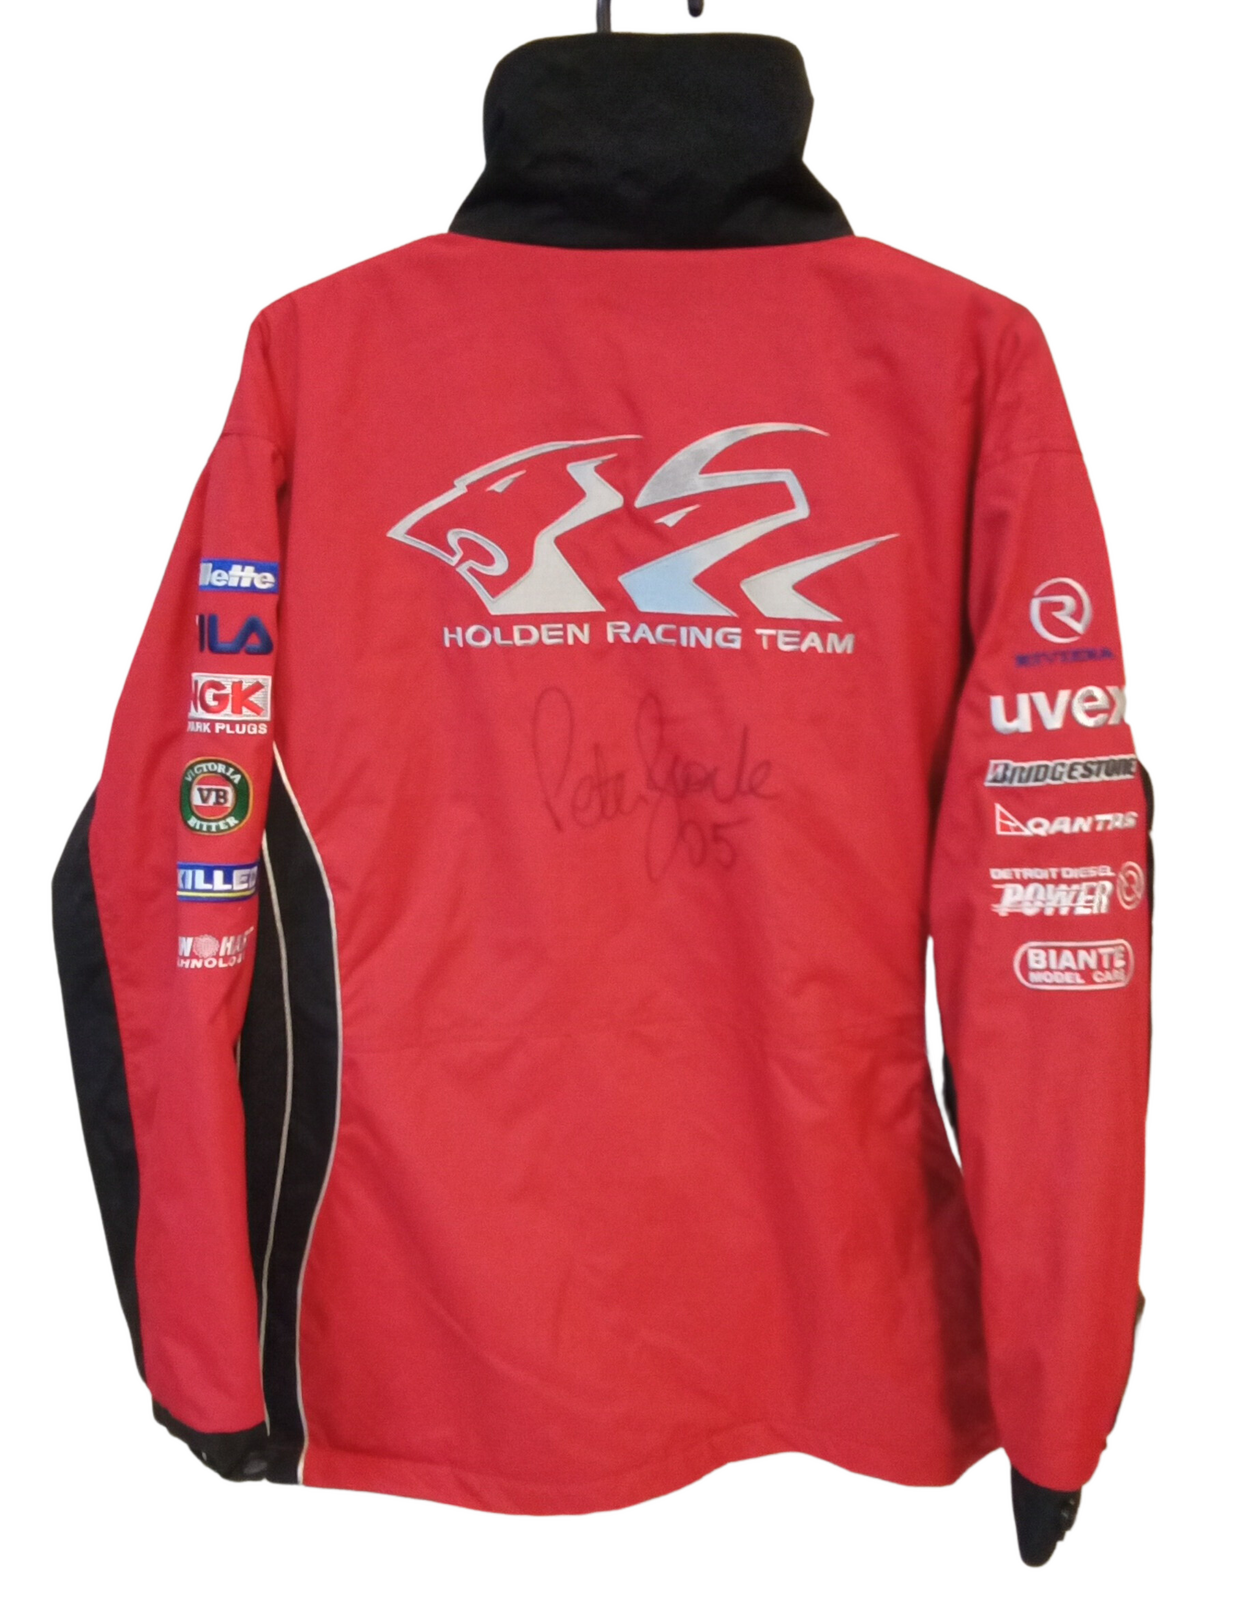 HRT Jacket Holden Racing Team HSV Genuine 2005 Size XL Signed By Peter ...